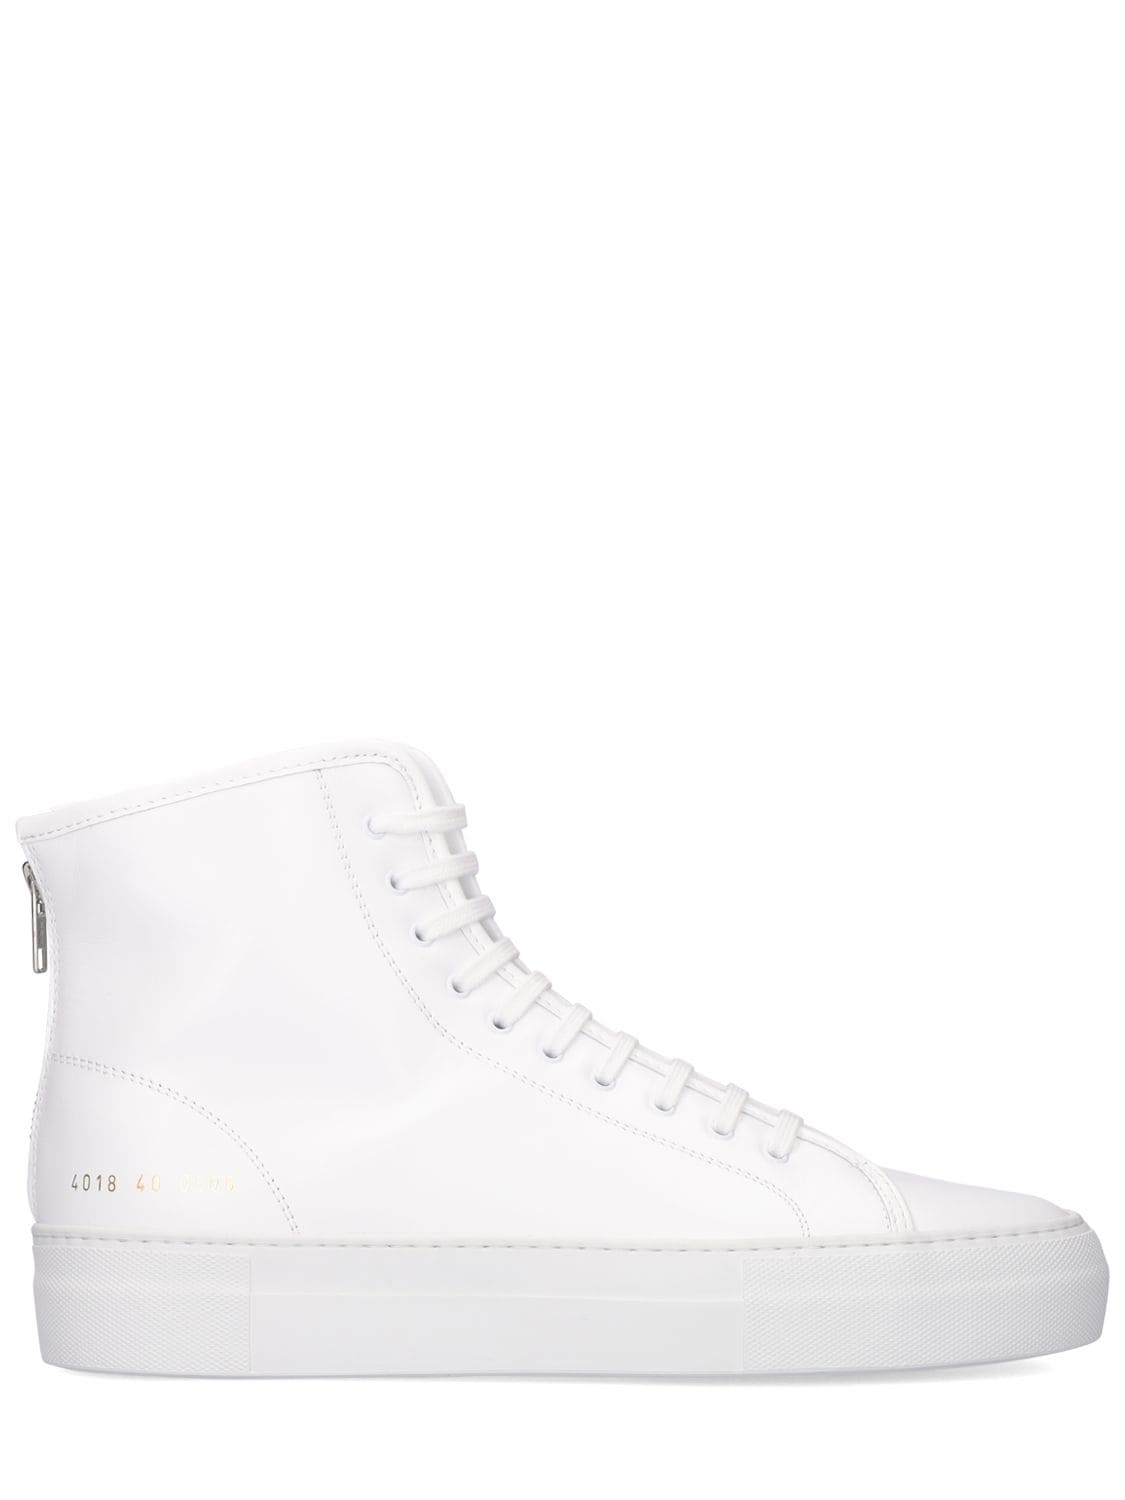 COMMON PROJECTS TOURNAMENT SUPER HIGH皮革运动鞋